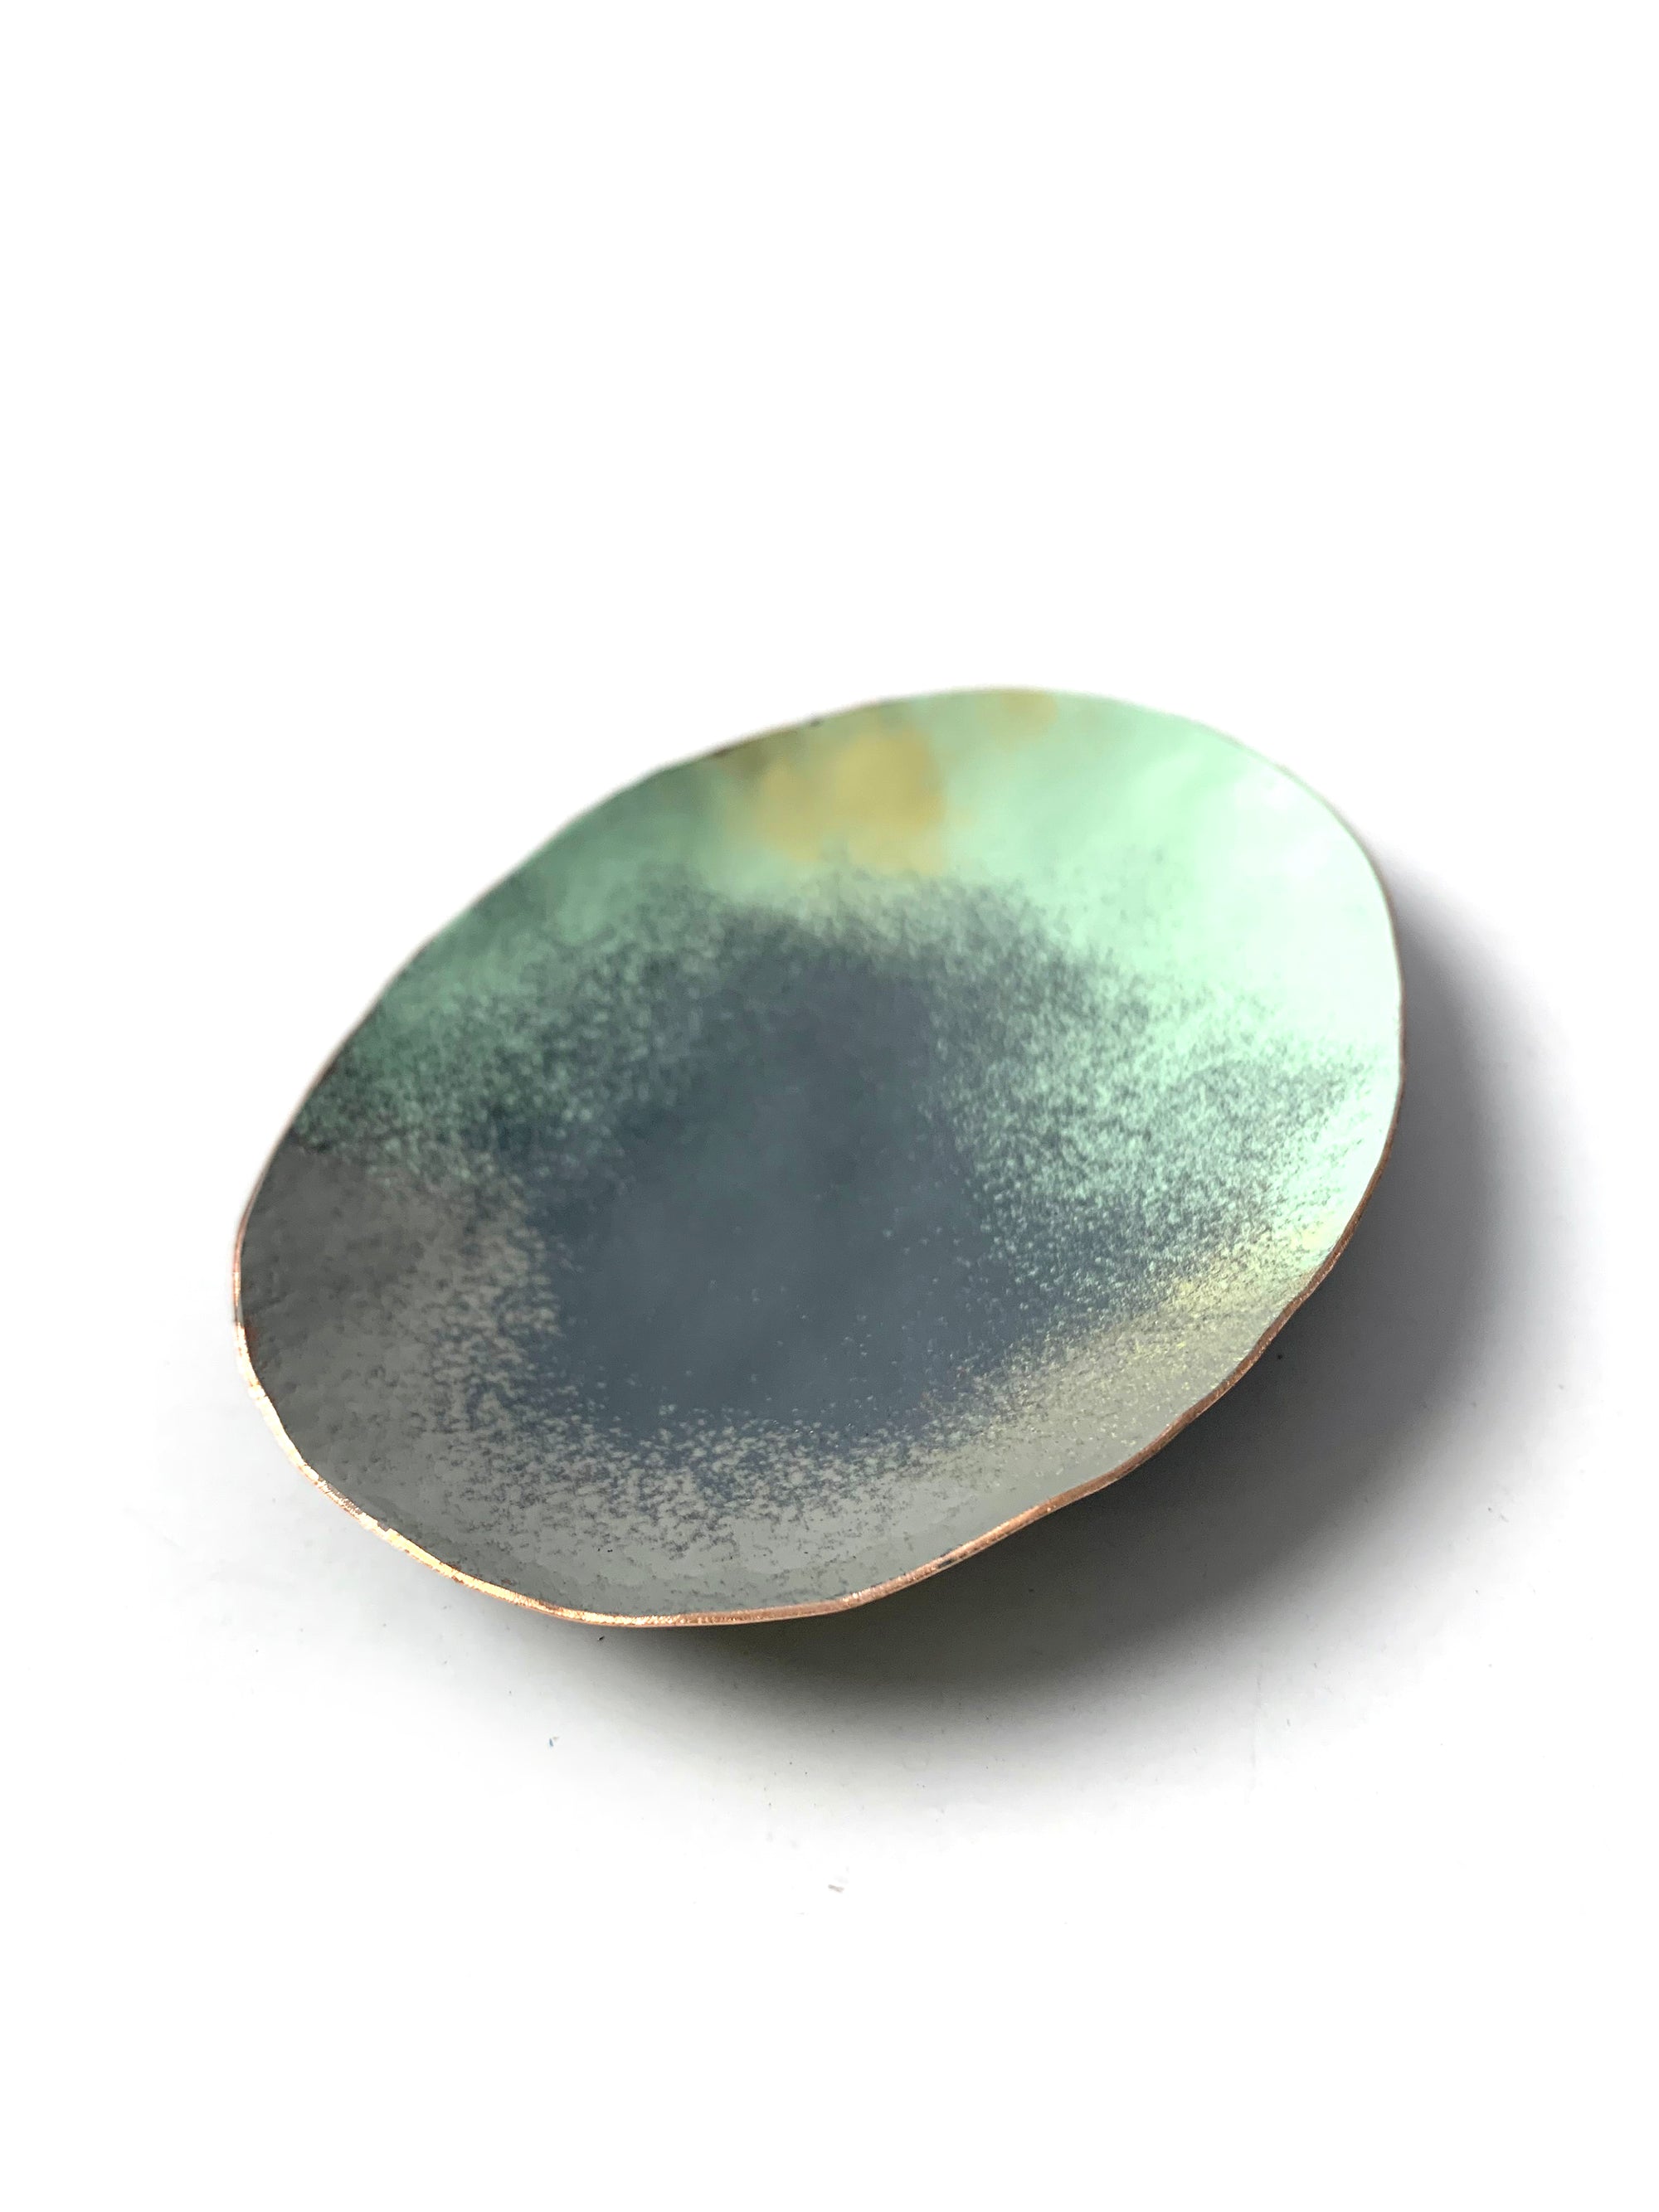 Oval Copper Dish in Grey and Soft Mint